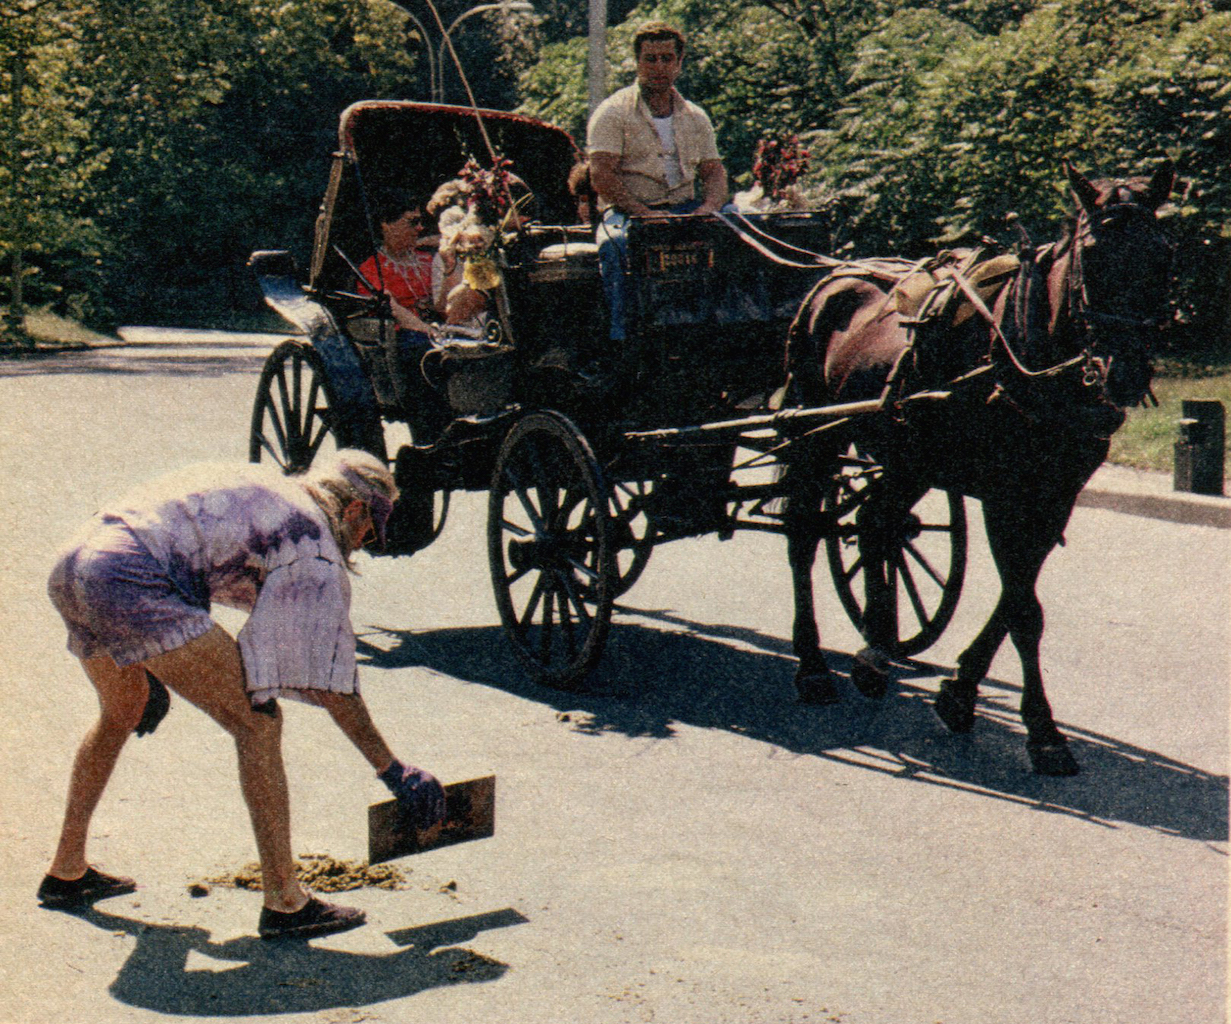 A photograph of Purple in a magazine profile, showing him scooping up horse manure in Central Park to fertilize the soil in his Garden of Eden.